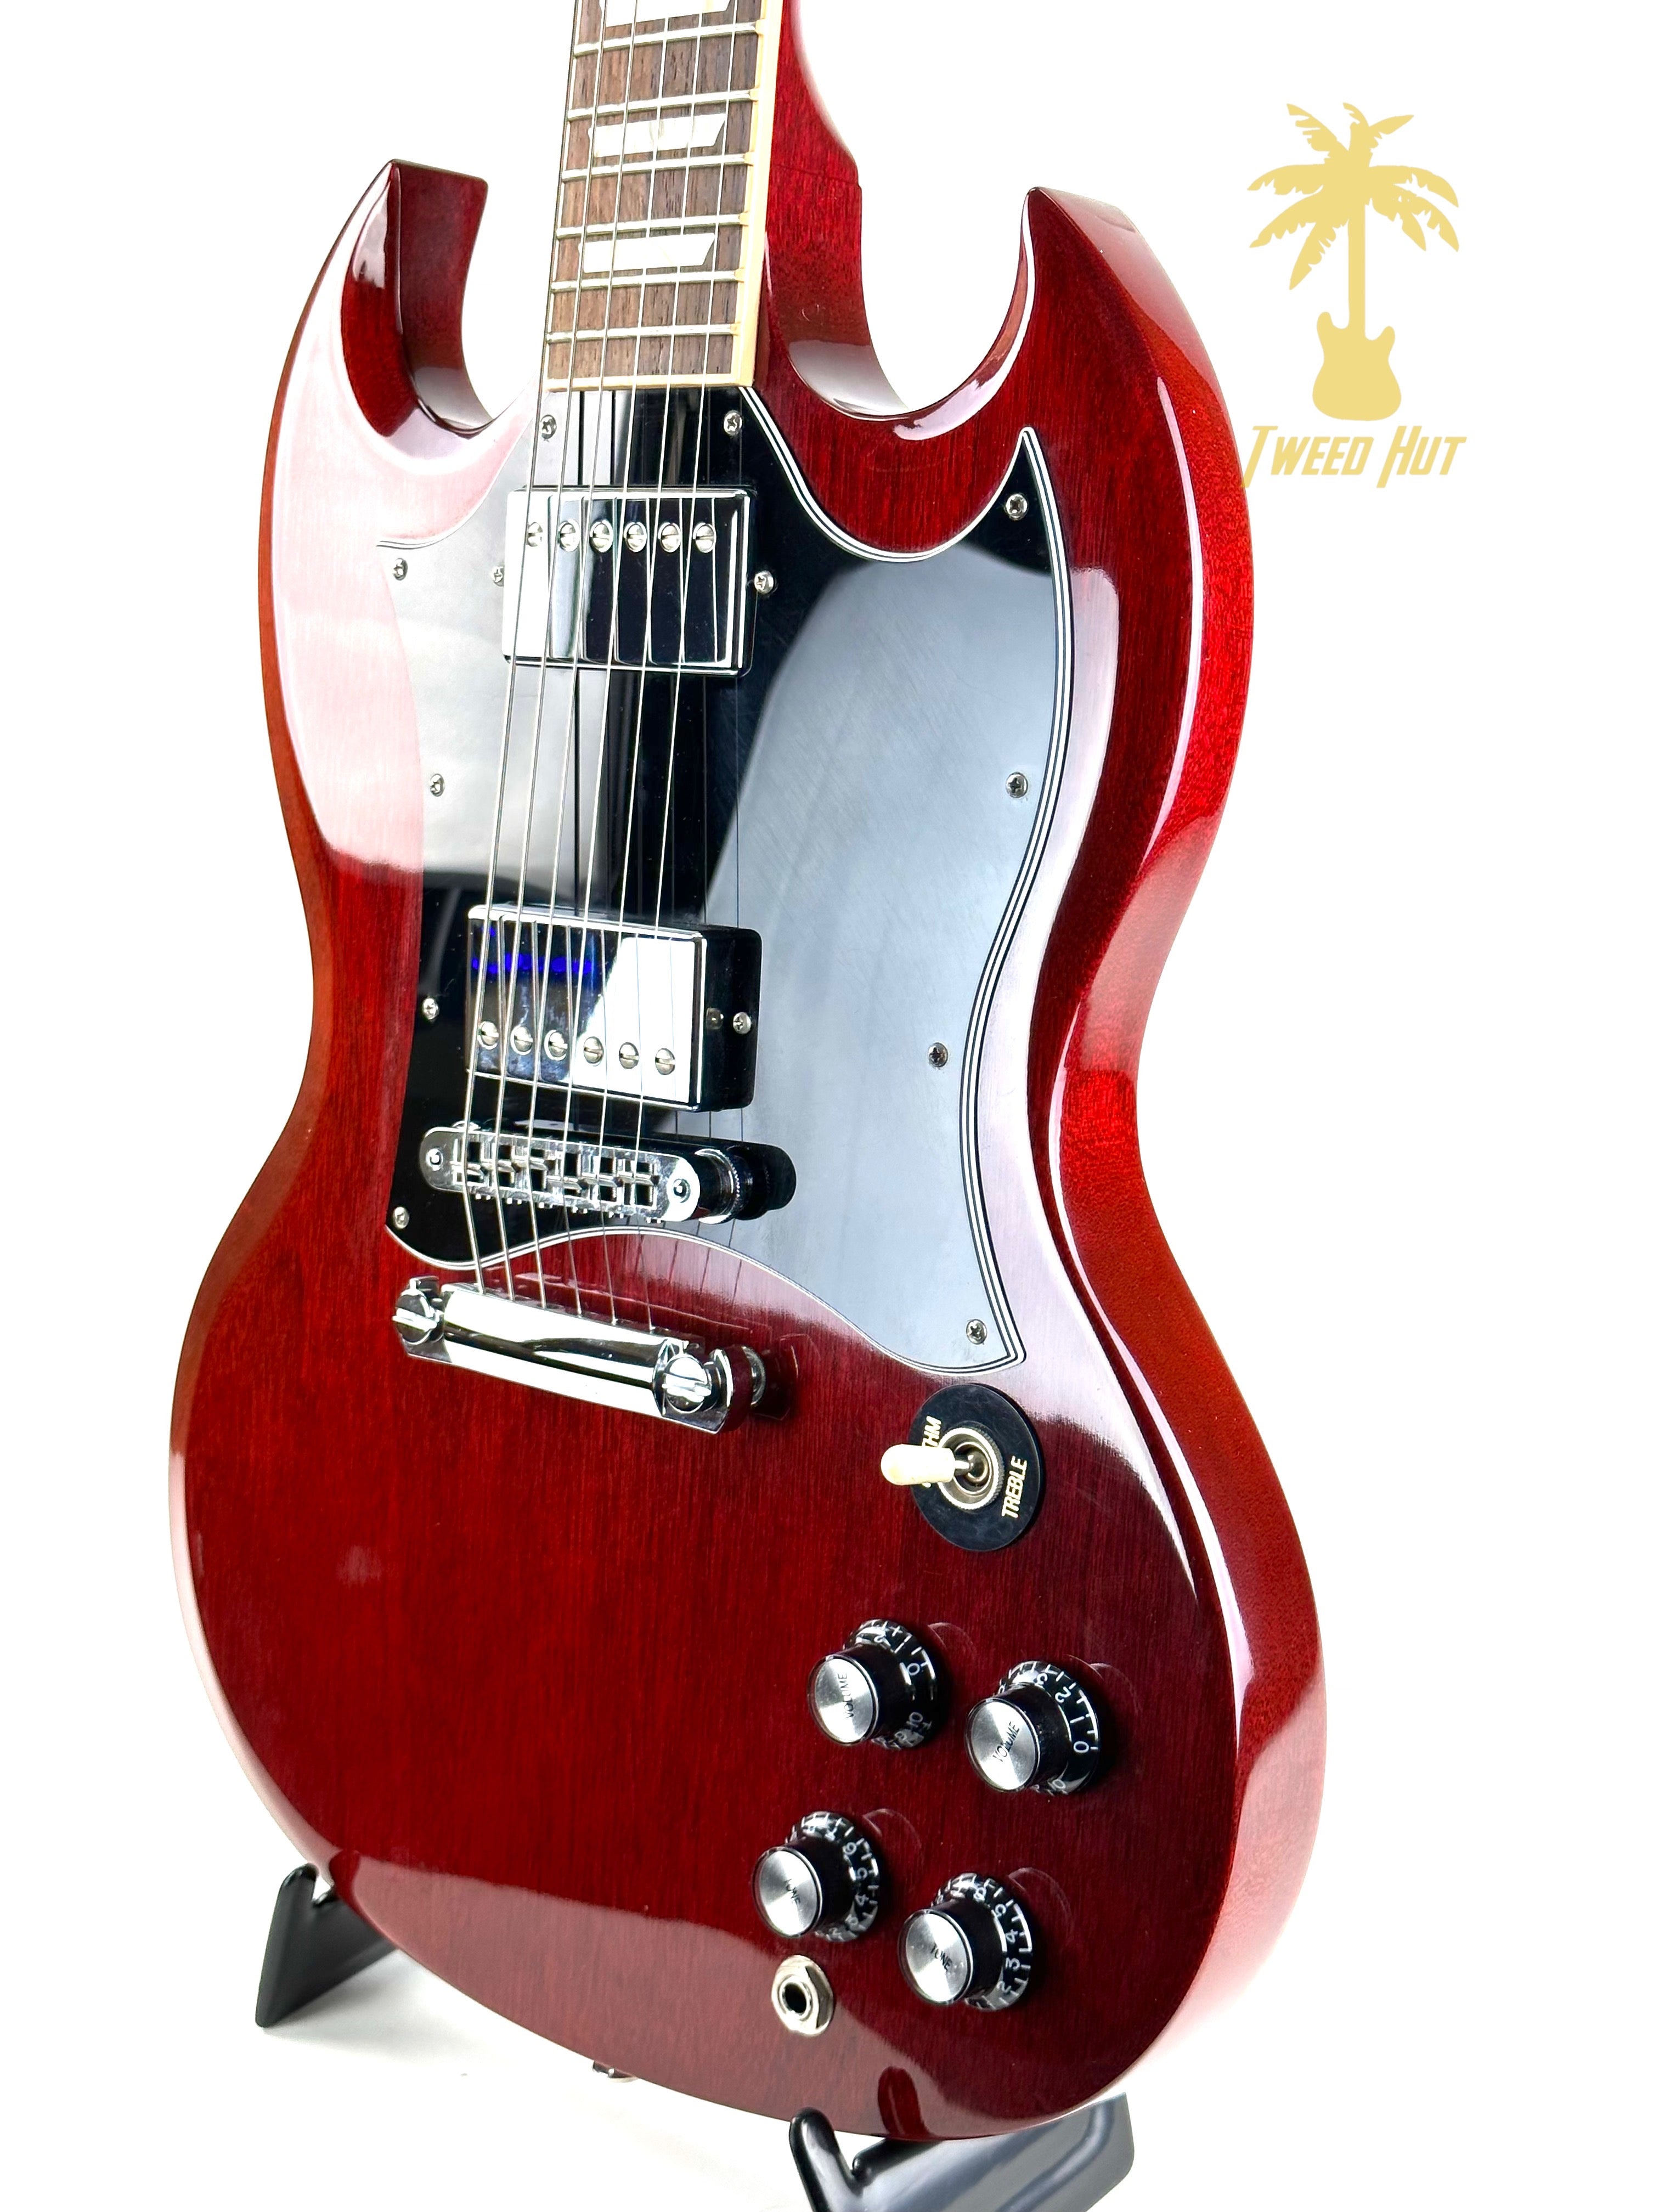 PRE-OWNED GIBSON SG STANDARD 2011 - HERITAGE CHERRY W/OHSC